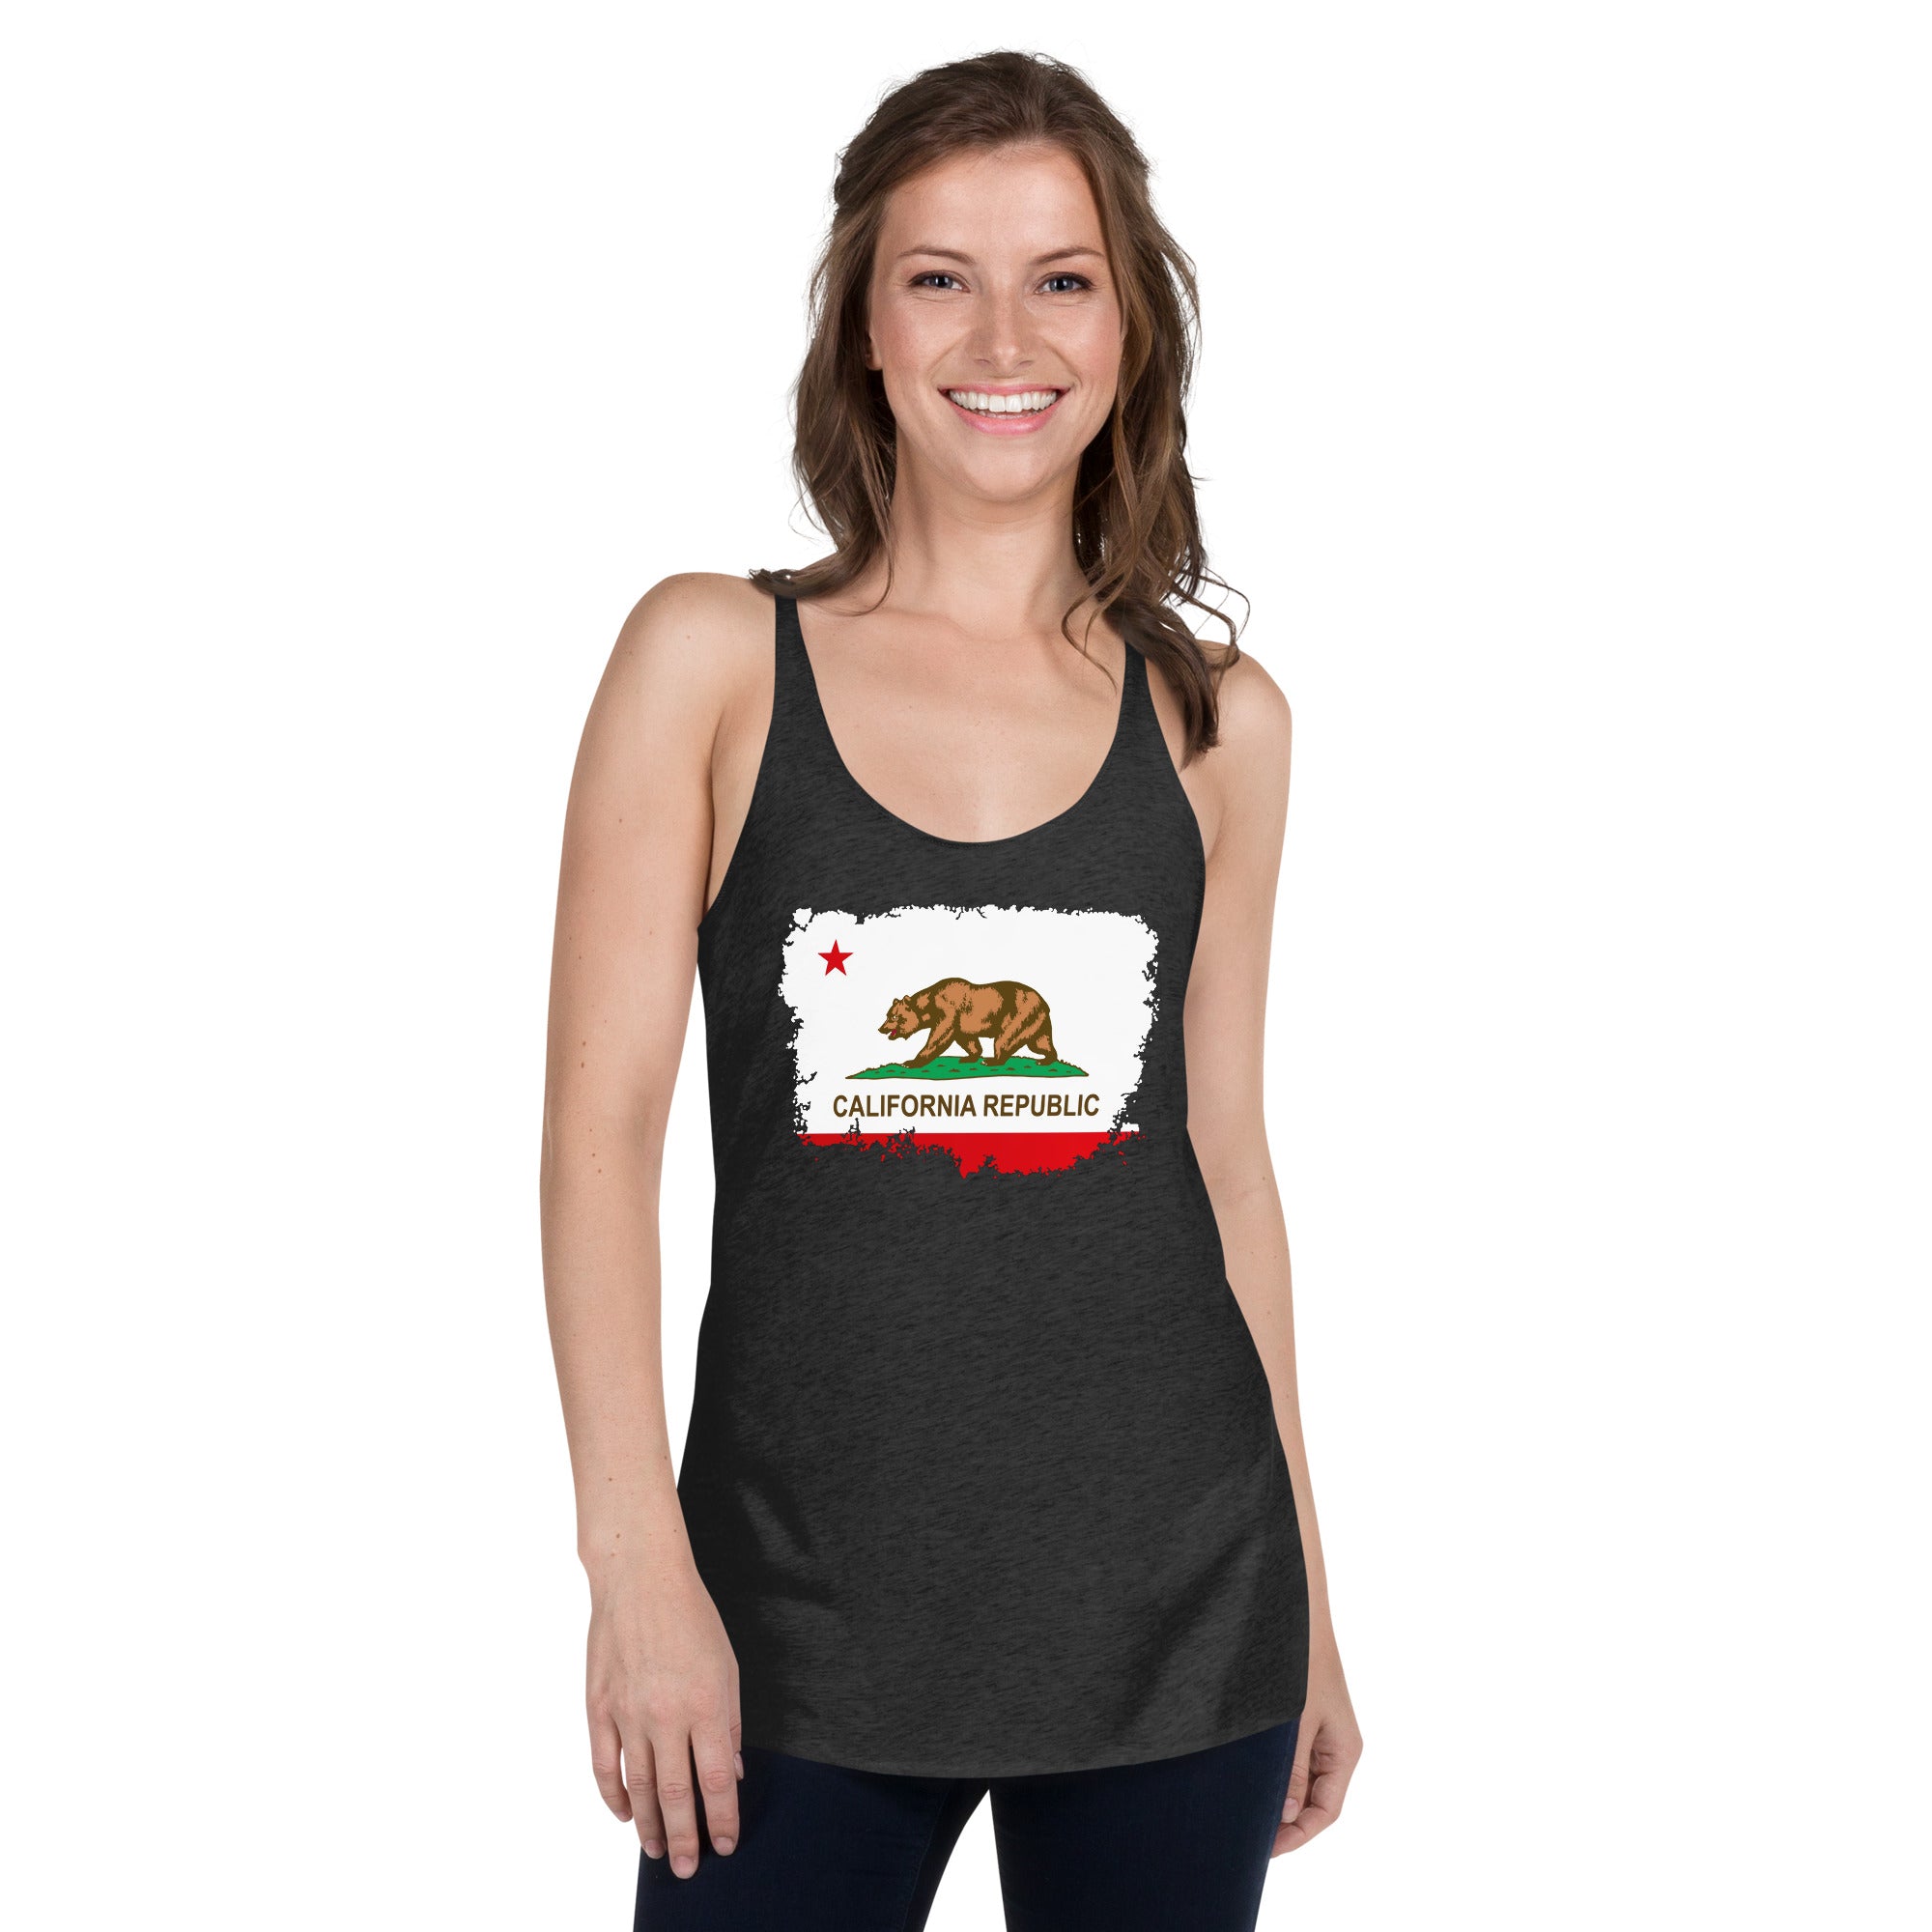 California State Flag Torn and battered Women's Racerback Tank Top Shirt